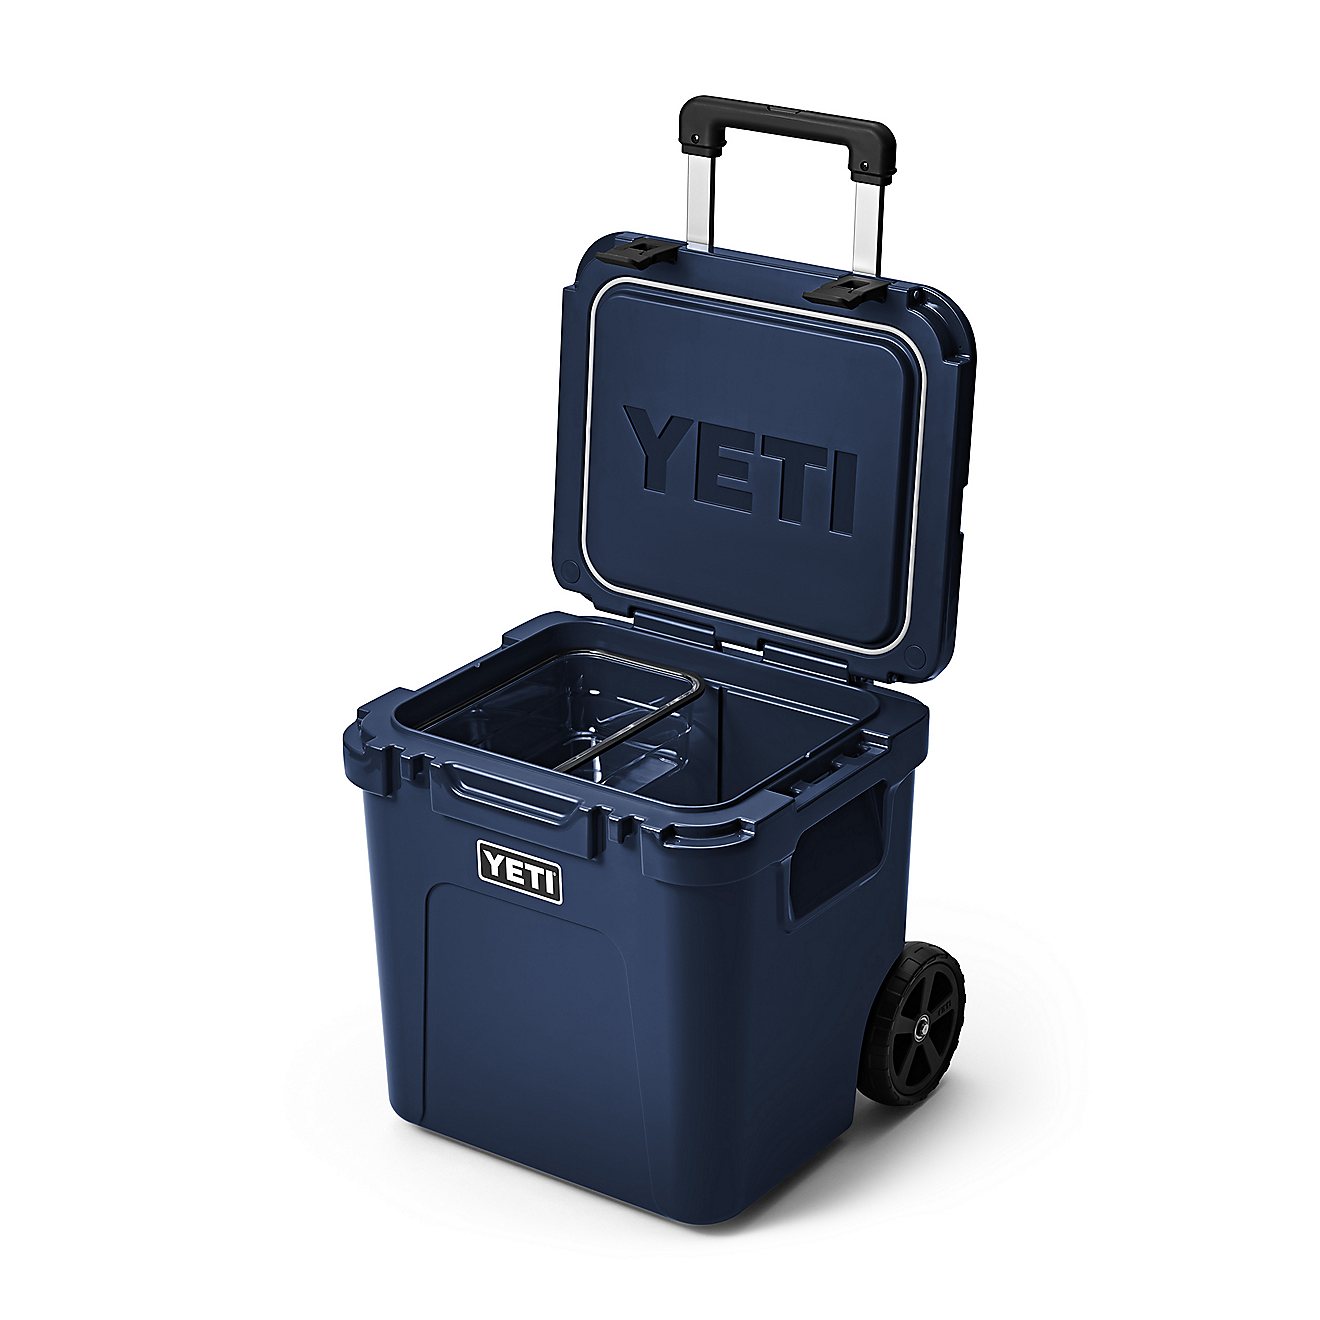 https://academy.scene7.com/is/image/academy///camping/coolers/blue_yeti-roadie-48-wheeled-cooler_10048200000/30db355aaf7a4074b889c3db01ef6136?$pdp-mobile-gallery-ng$